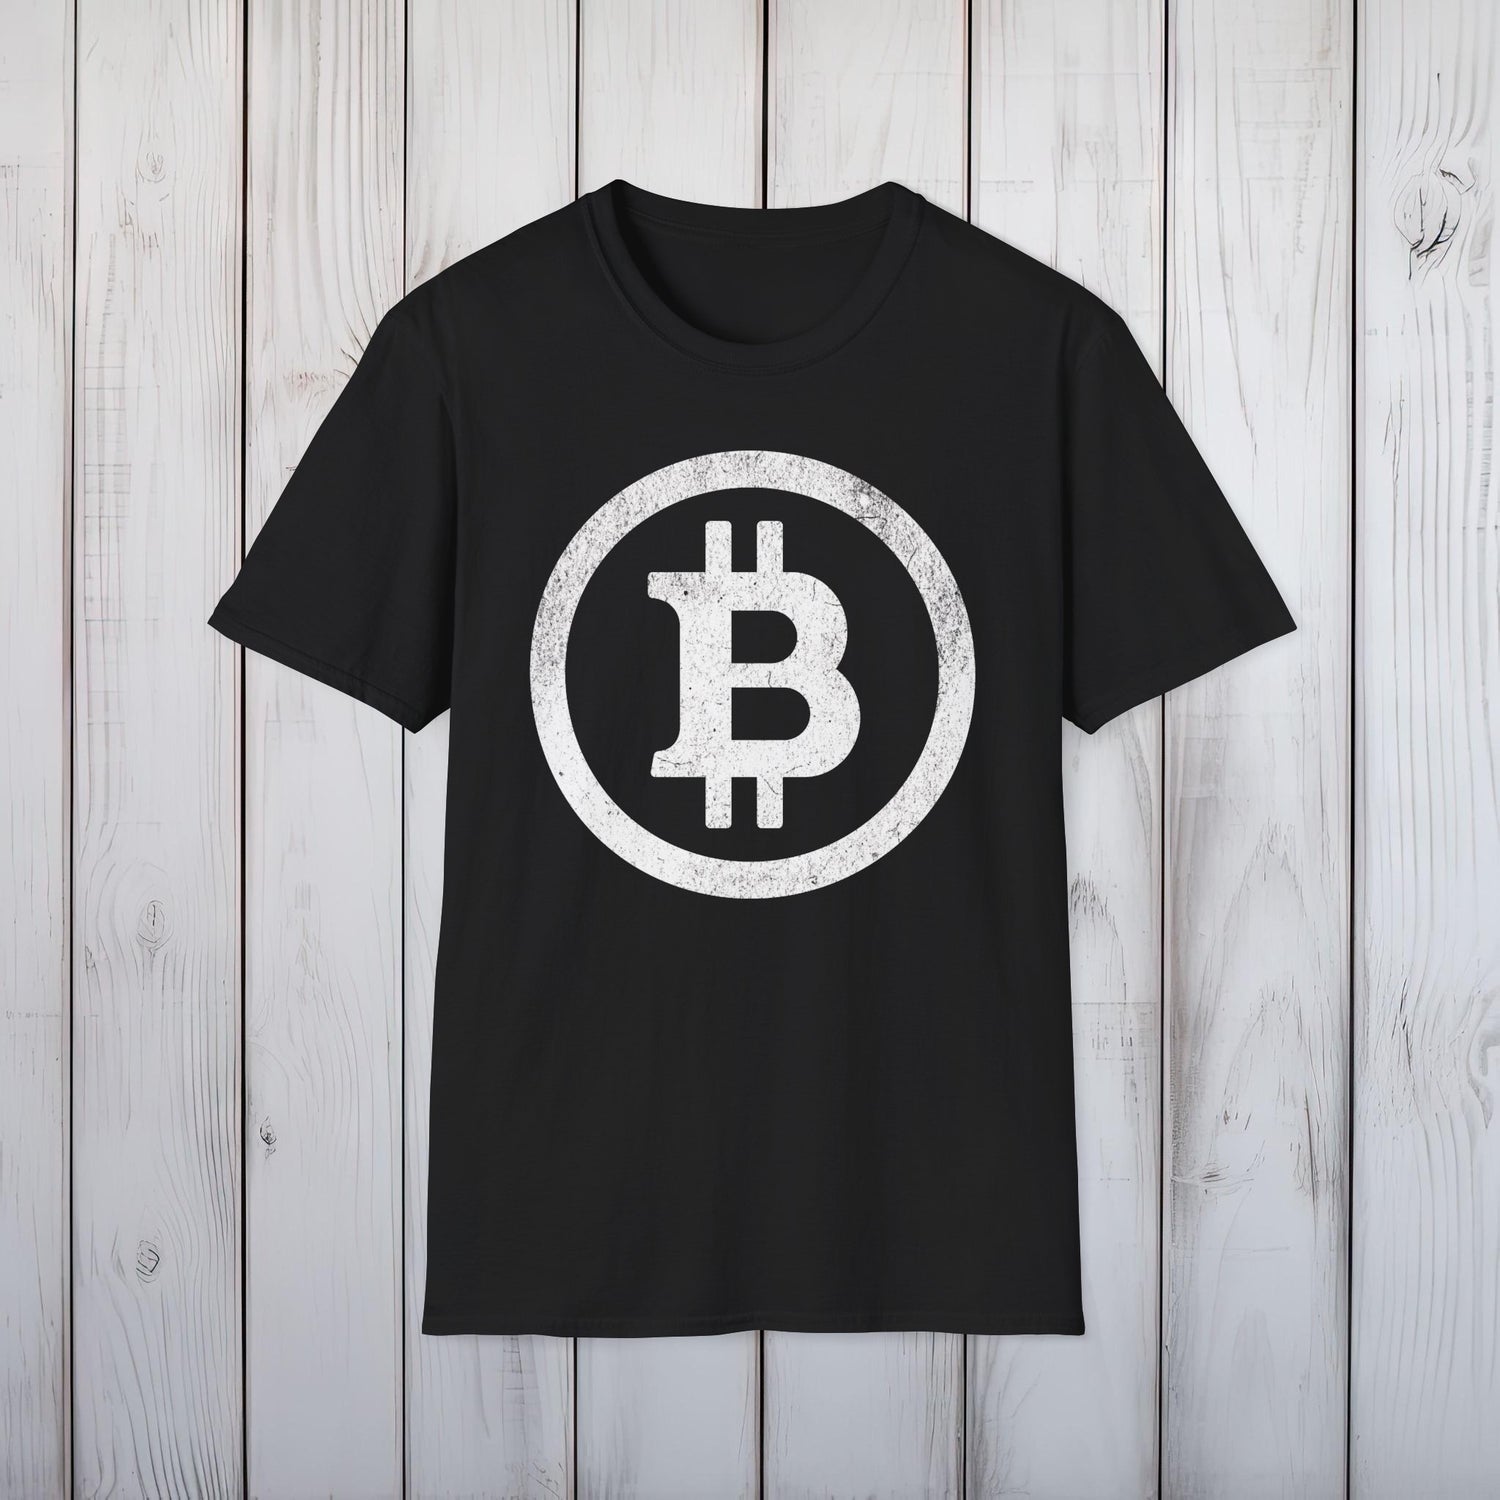 Bitcoin & Cryptocurrency Tees